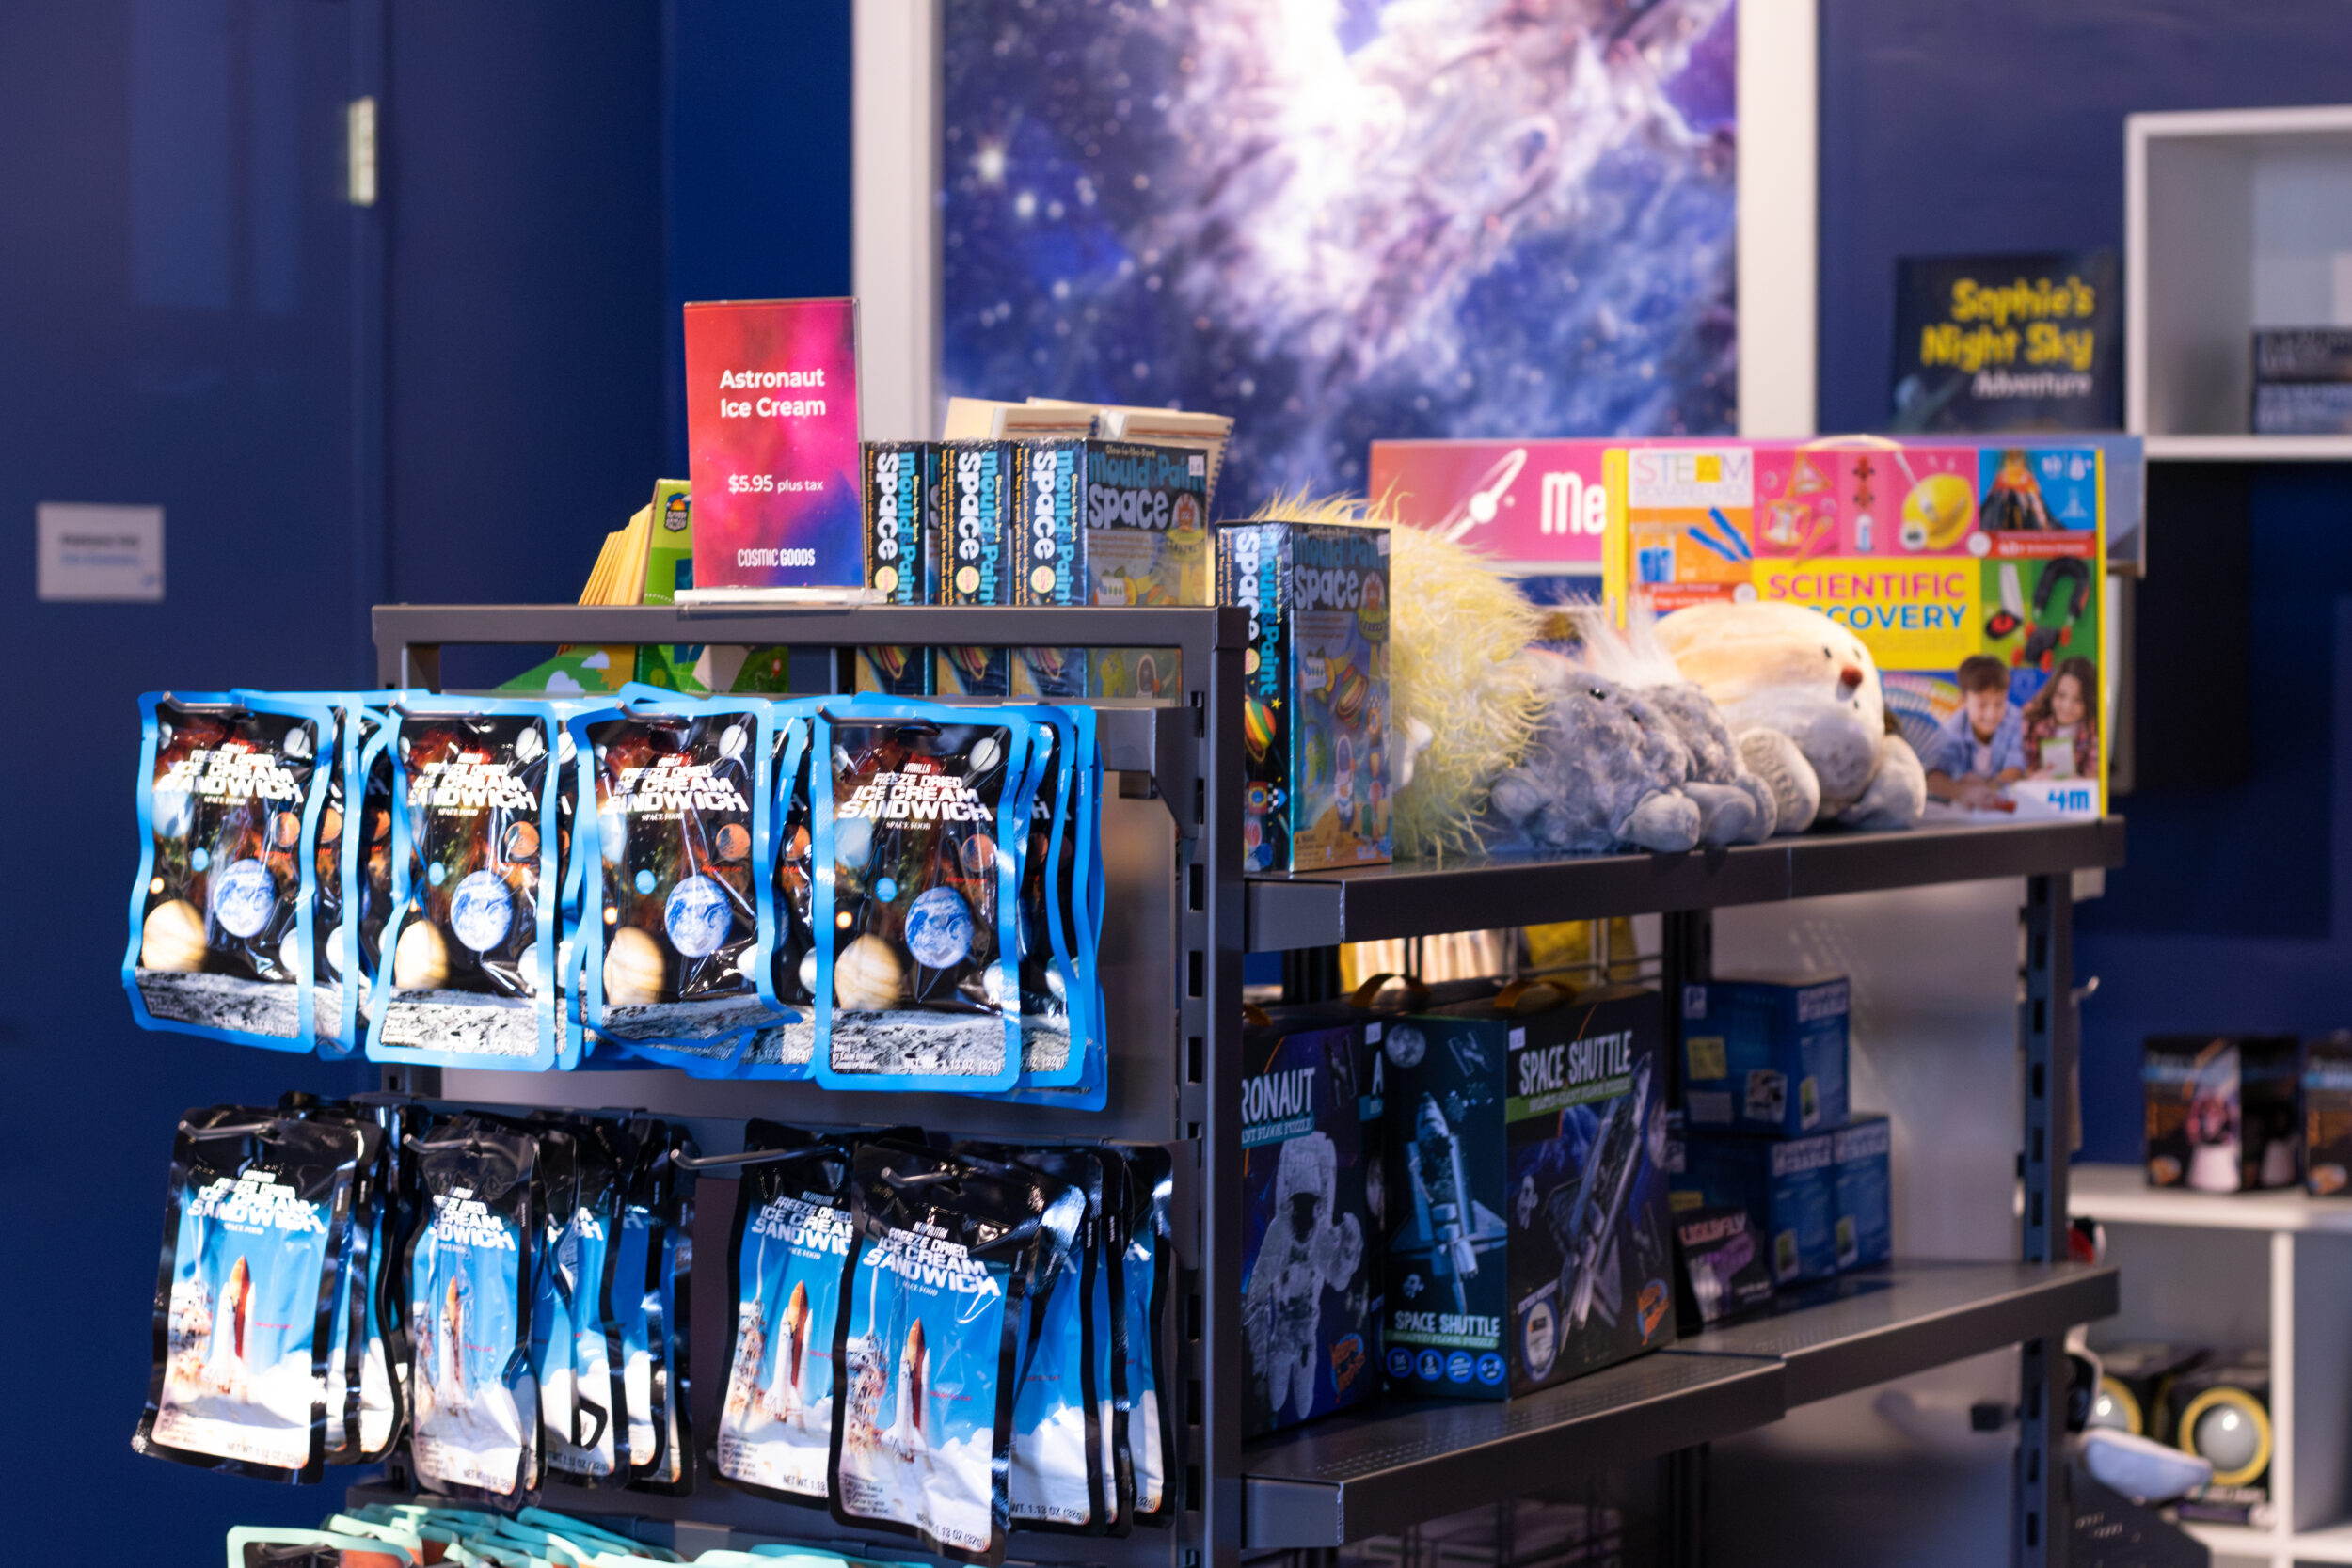 A space-themed gift shop with rows of shelves and tables. In the background, there is a framed picture of space. On the shelves, there are boxes, freeze-dried ice cream, and plushies.